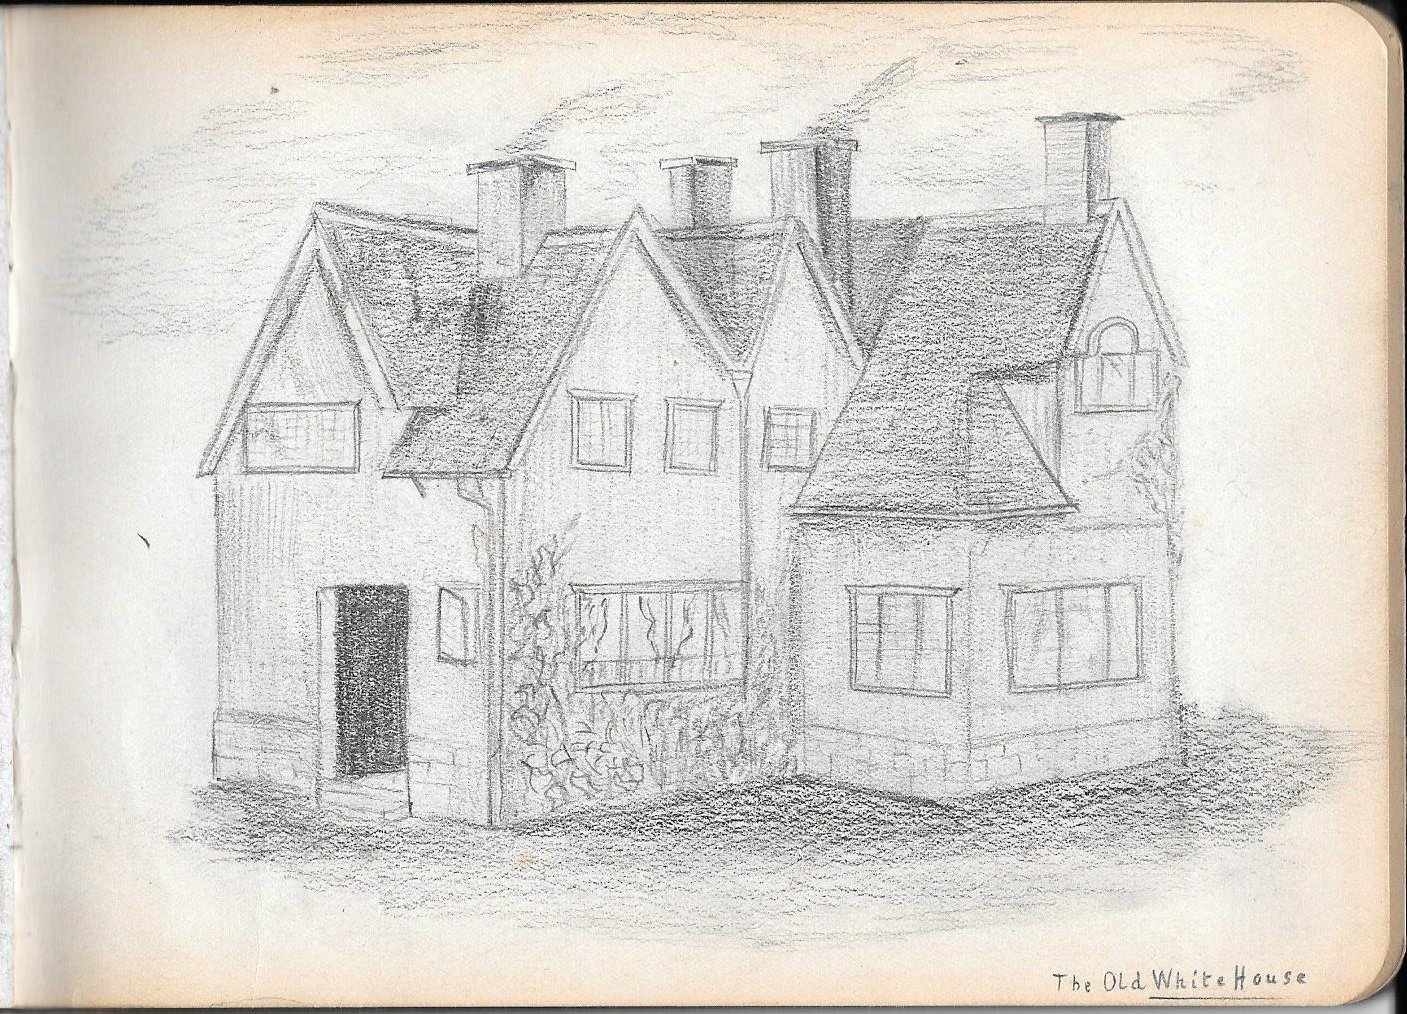 Old White House sketch by Dorothy Brooks, date unknown